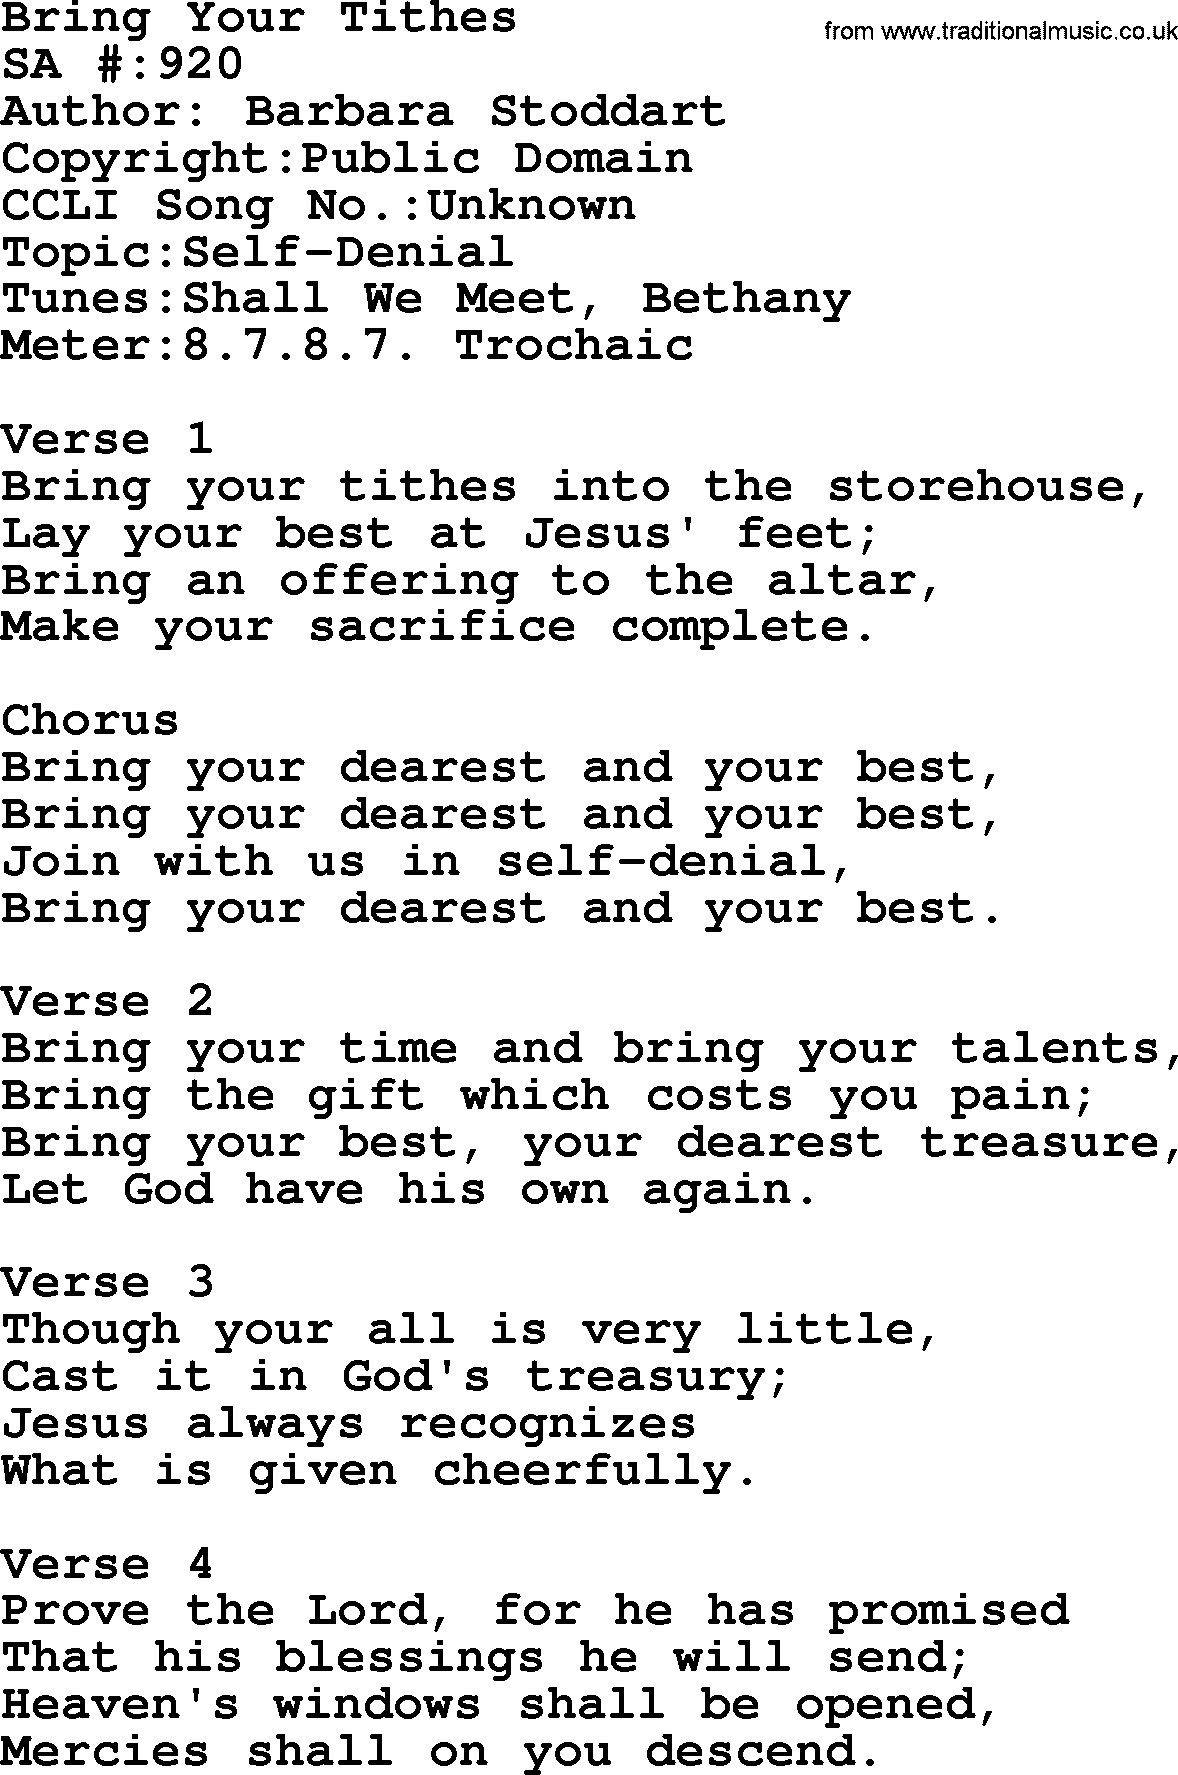 Salvation Army Hymnal, title: Bring Your Tithes, with lyrics and PDF,